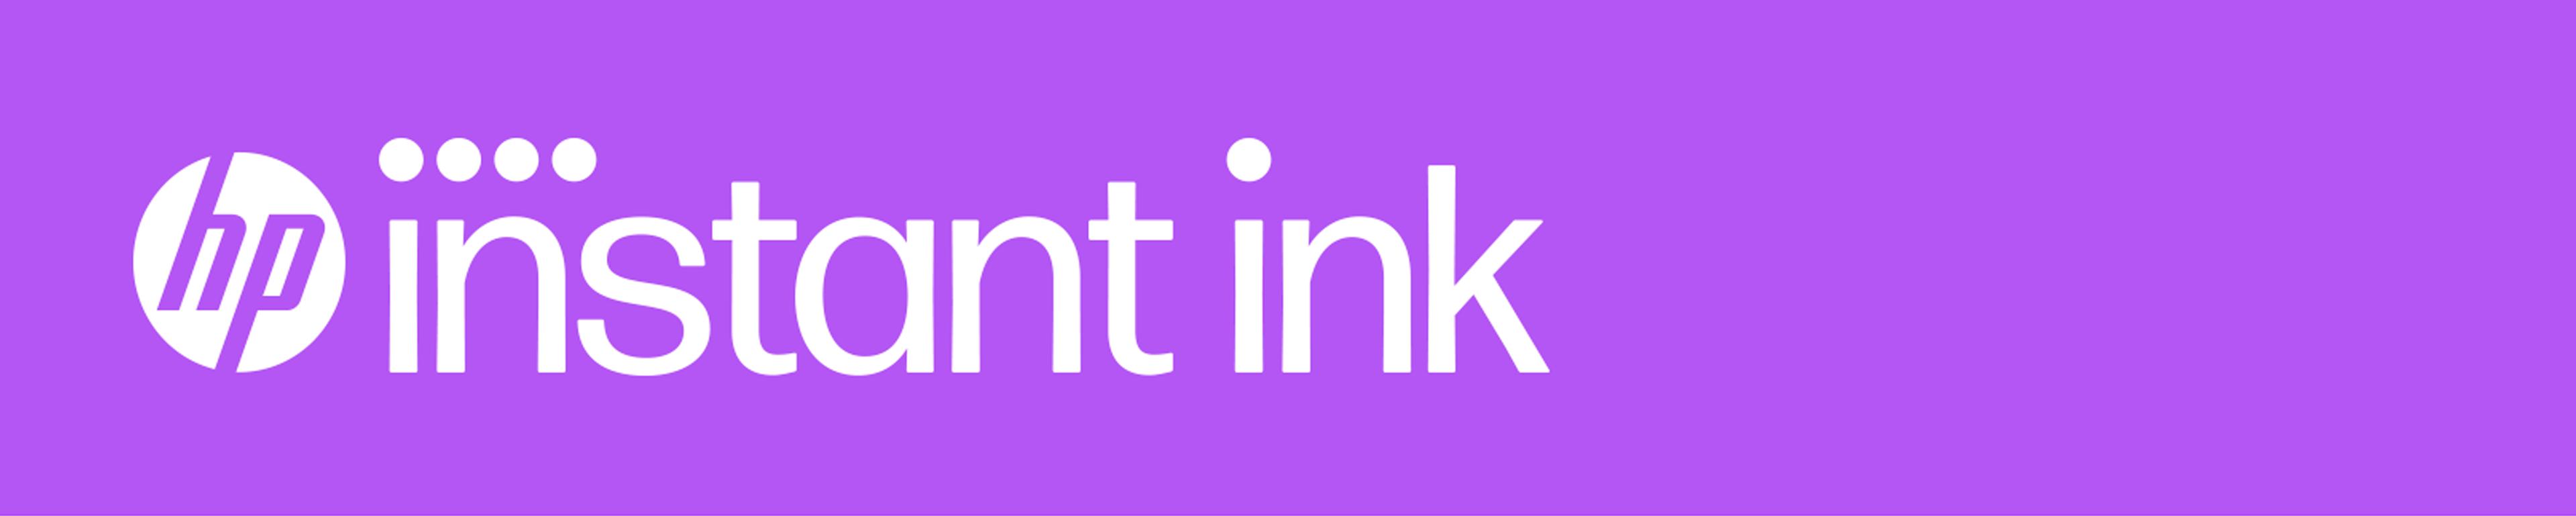 HP Instant Ink.